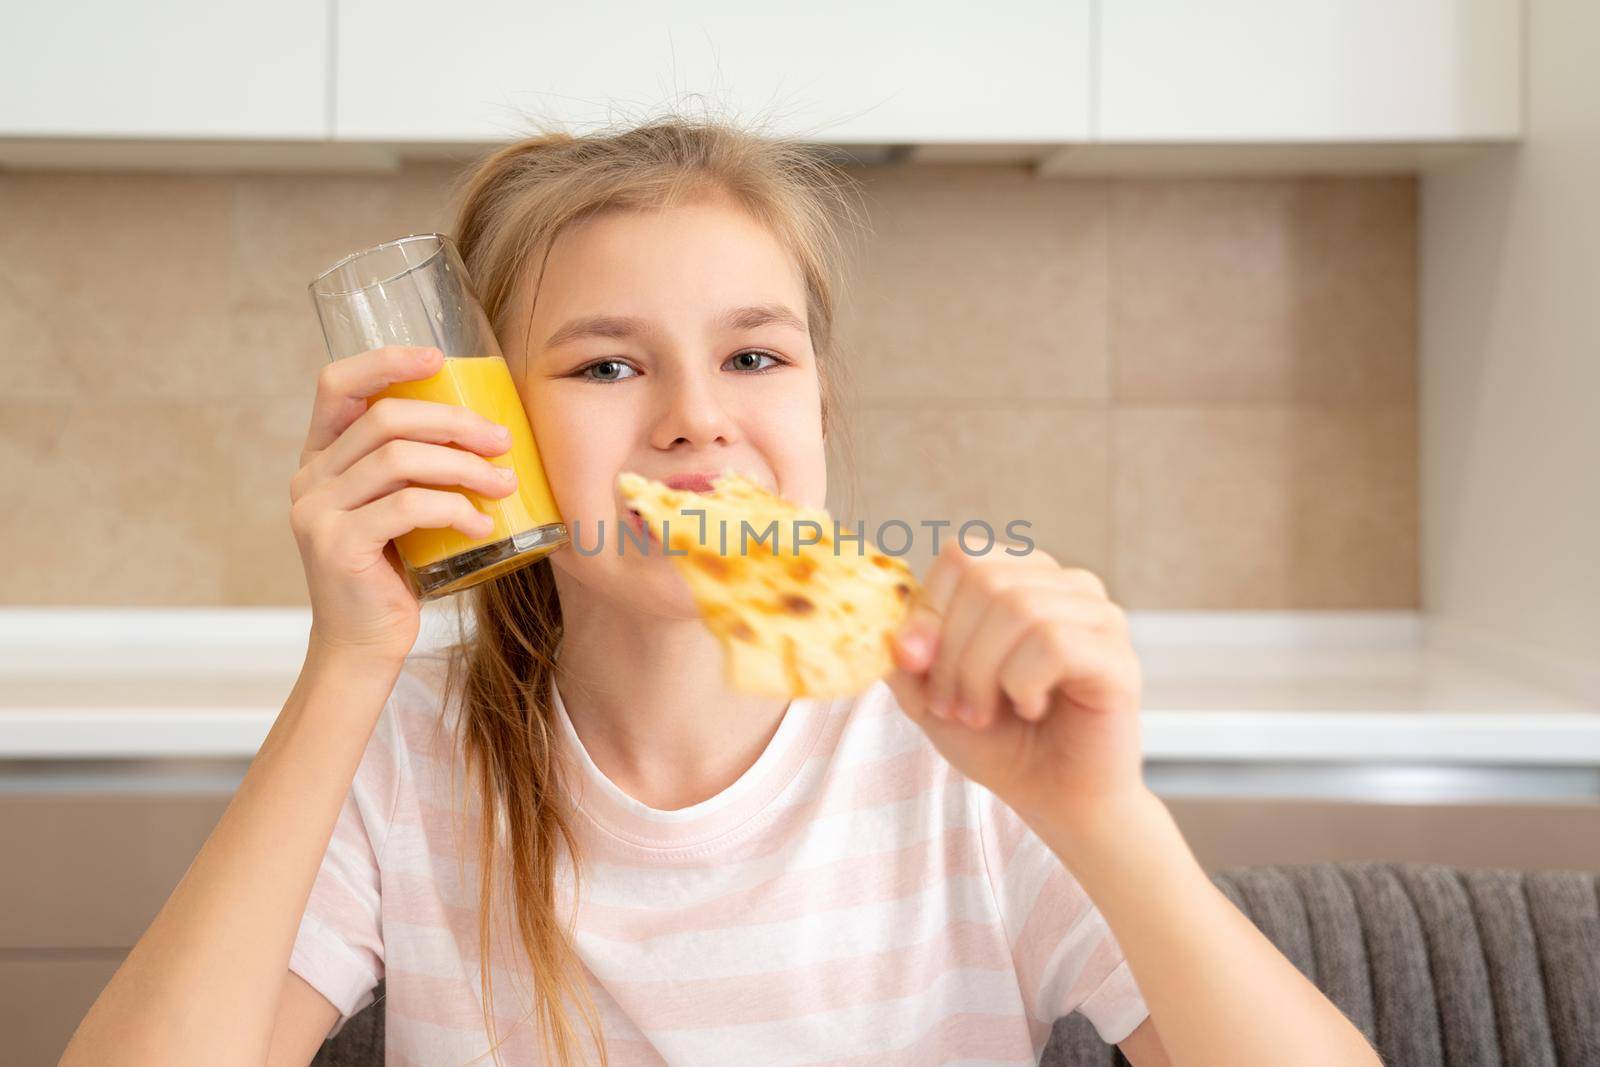 Teenage girl eating a slice of pizza and drinking orange juice in the kitchen by Mariakray